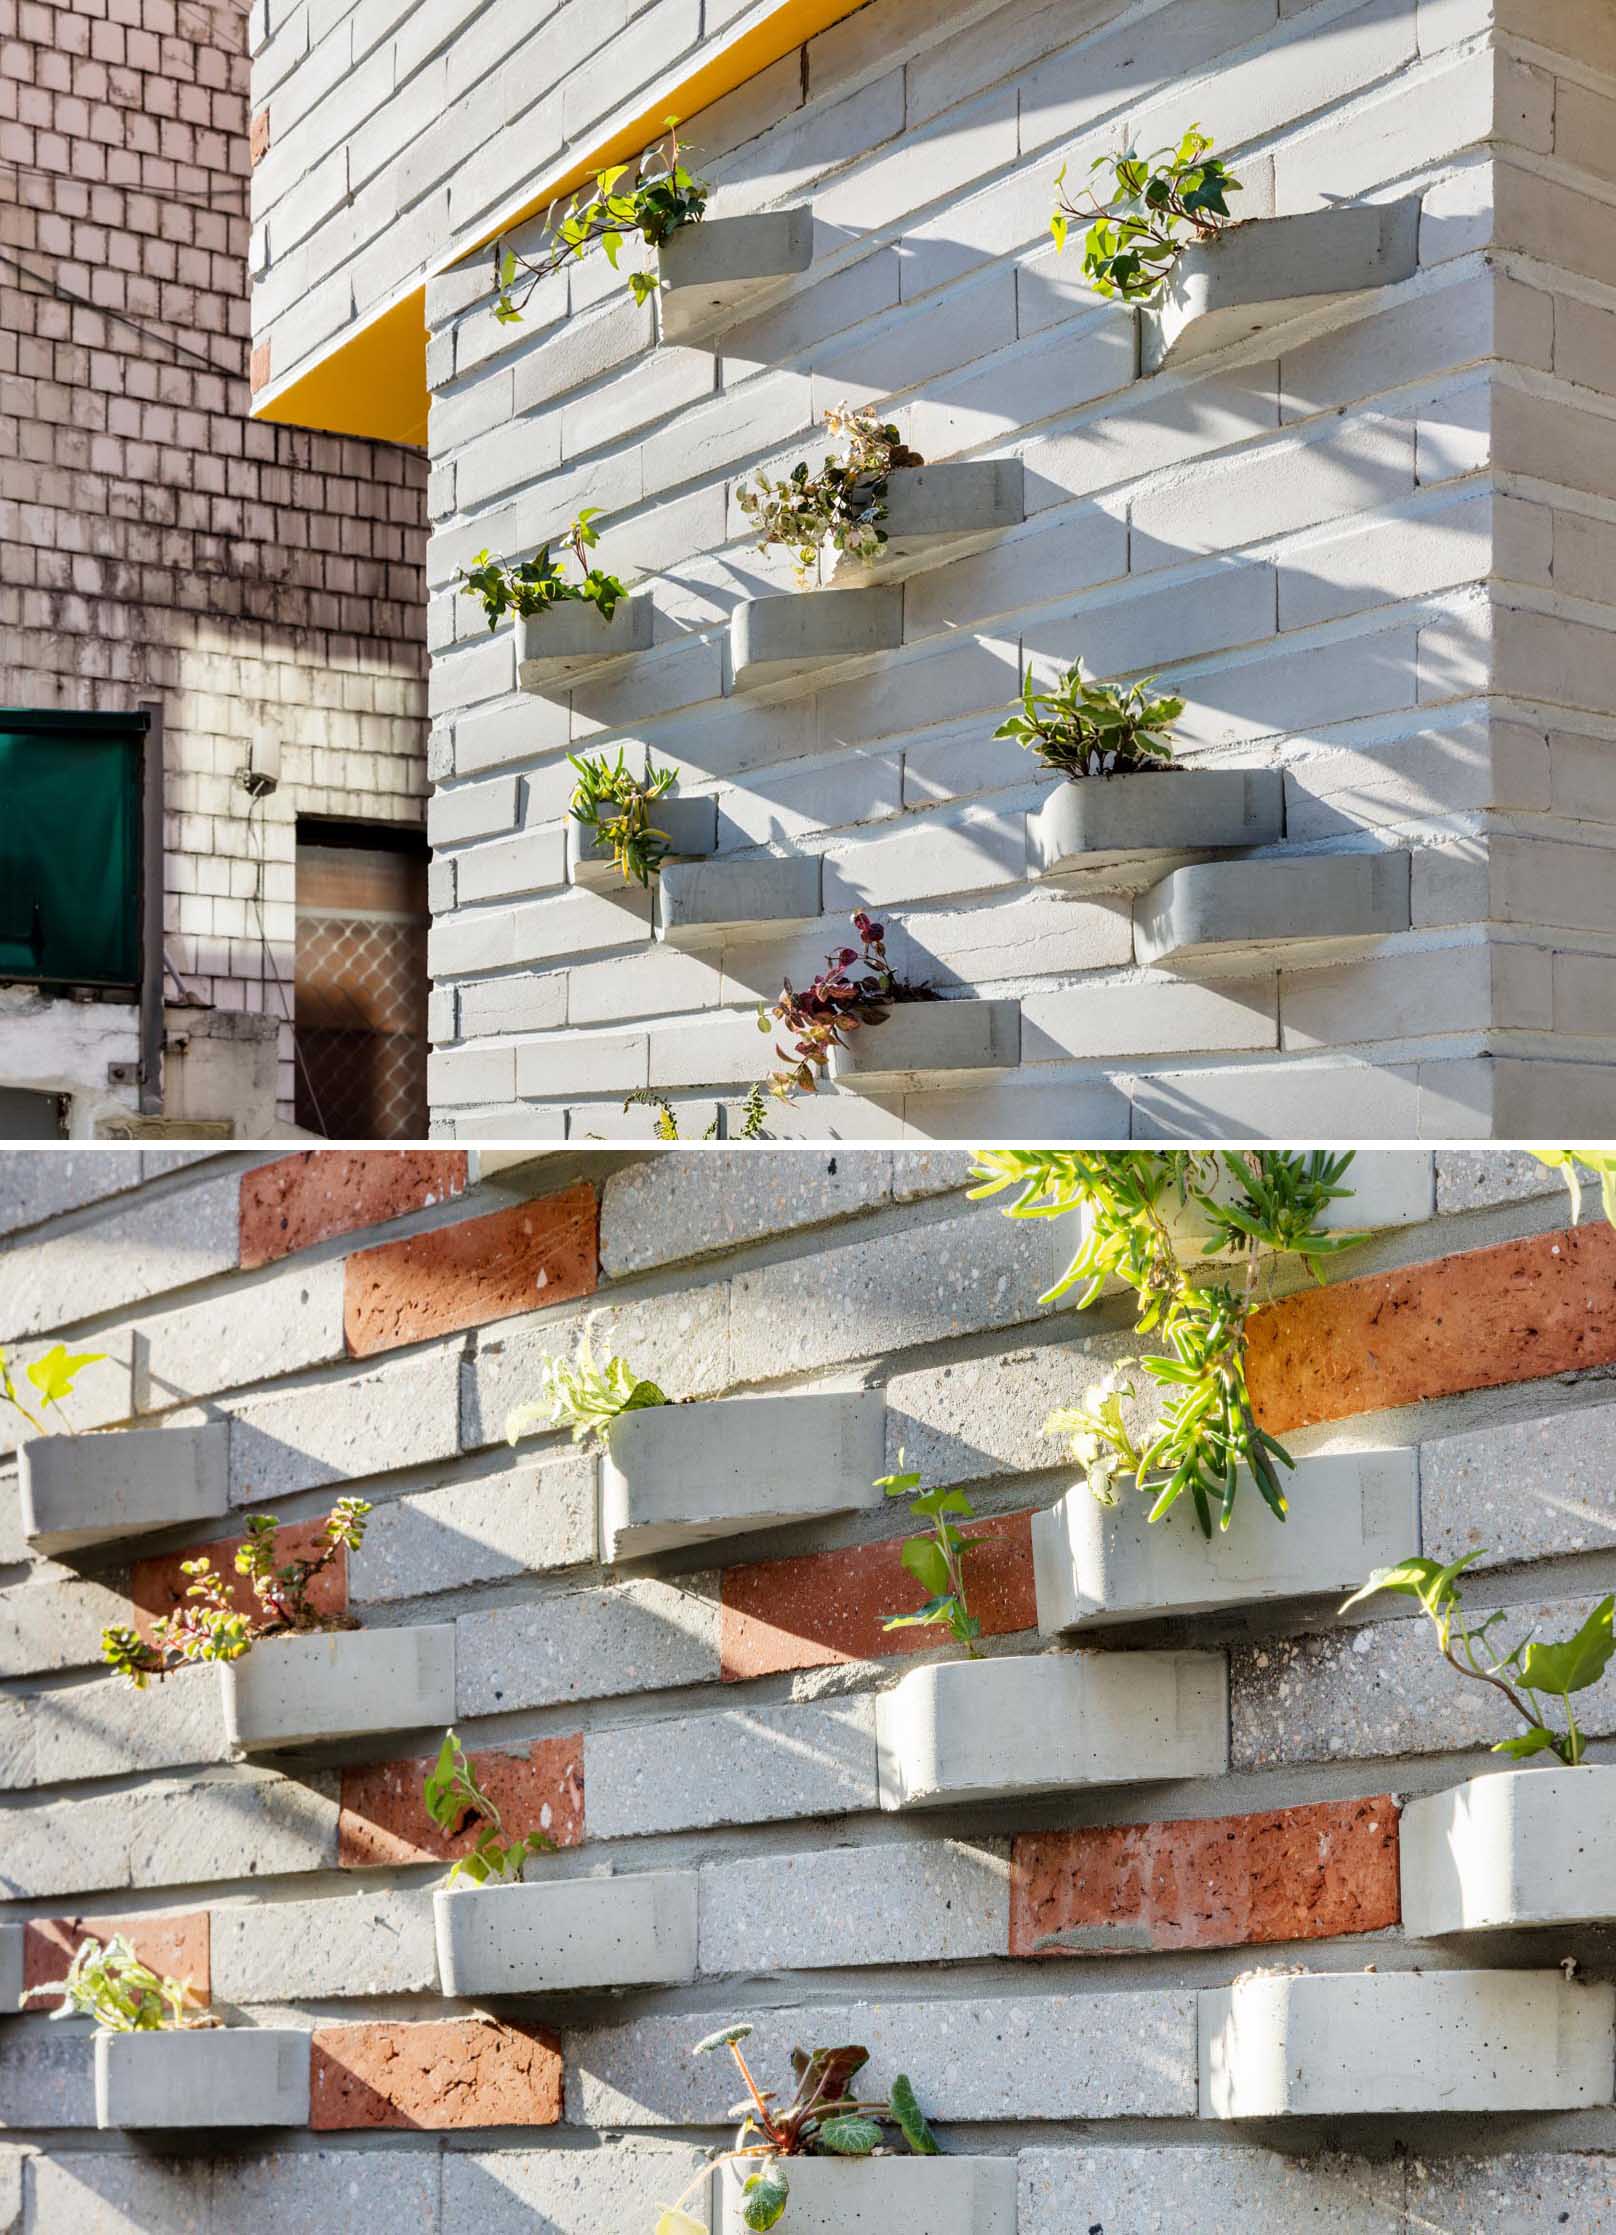 A modern brick building with incorporated plants into the facade.